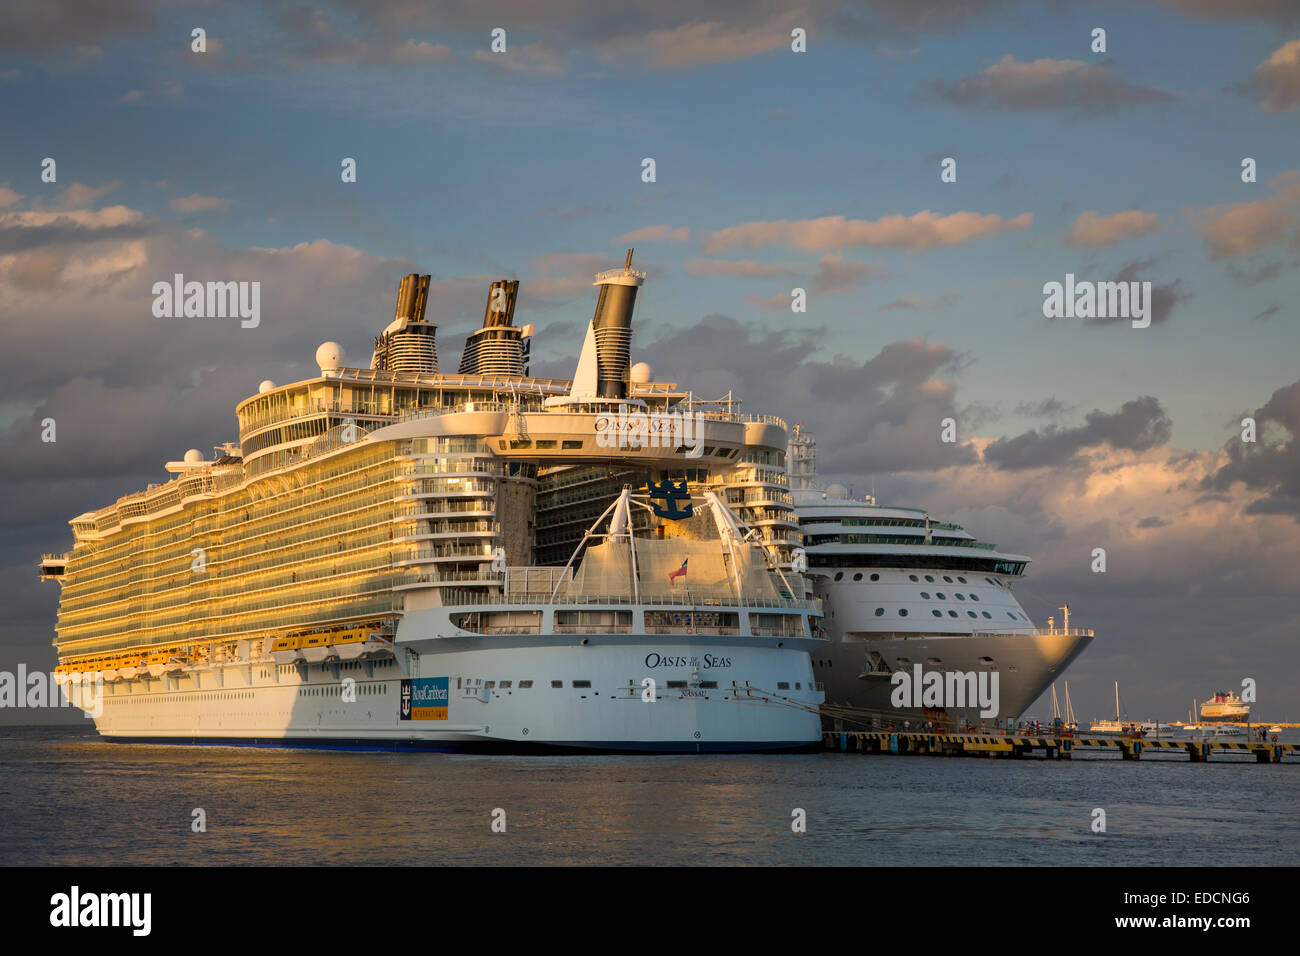 Royal Caribbean's gigantic Oasis of the Seas Cruise ship dwarfs a more 'normal' sized ship in port, Cozumel, Yucatan, Mexico Stock Photo